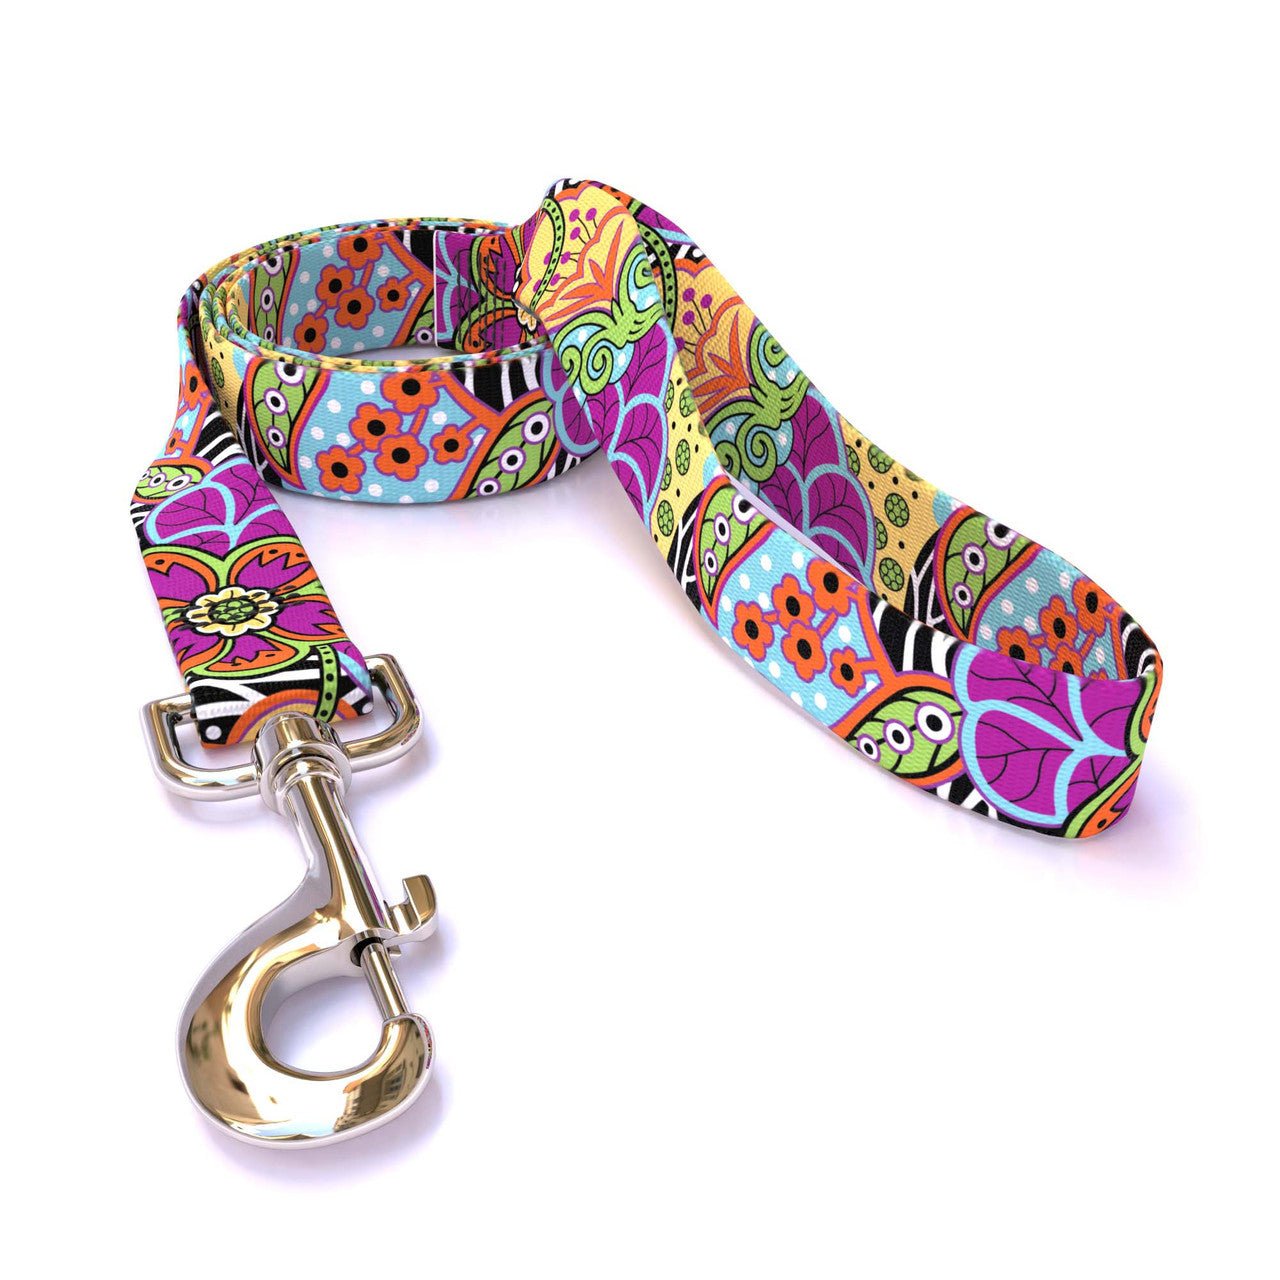 Yellow Dog Design Leashes 1" x 5' Amazon Floral